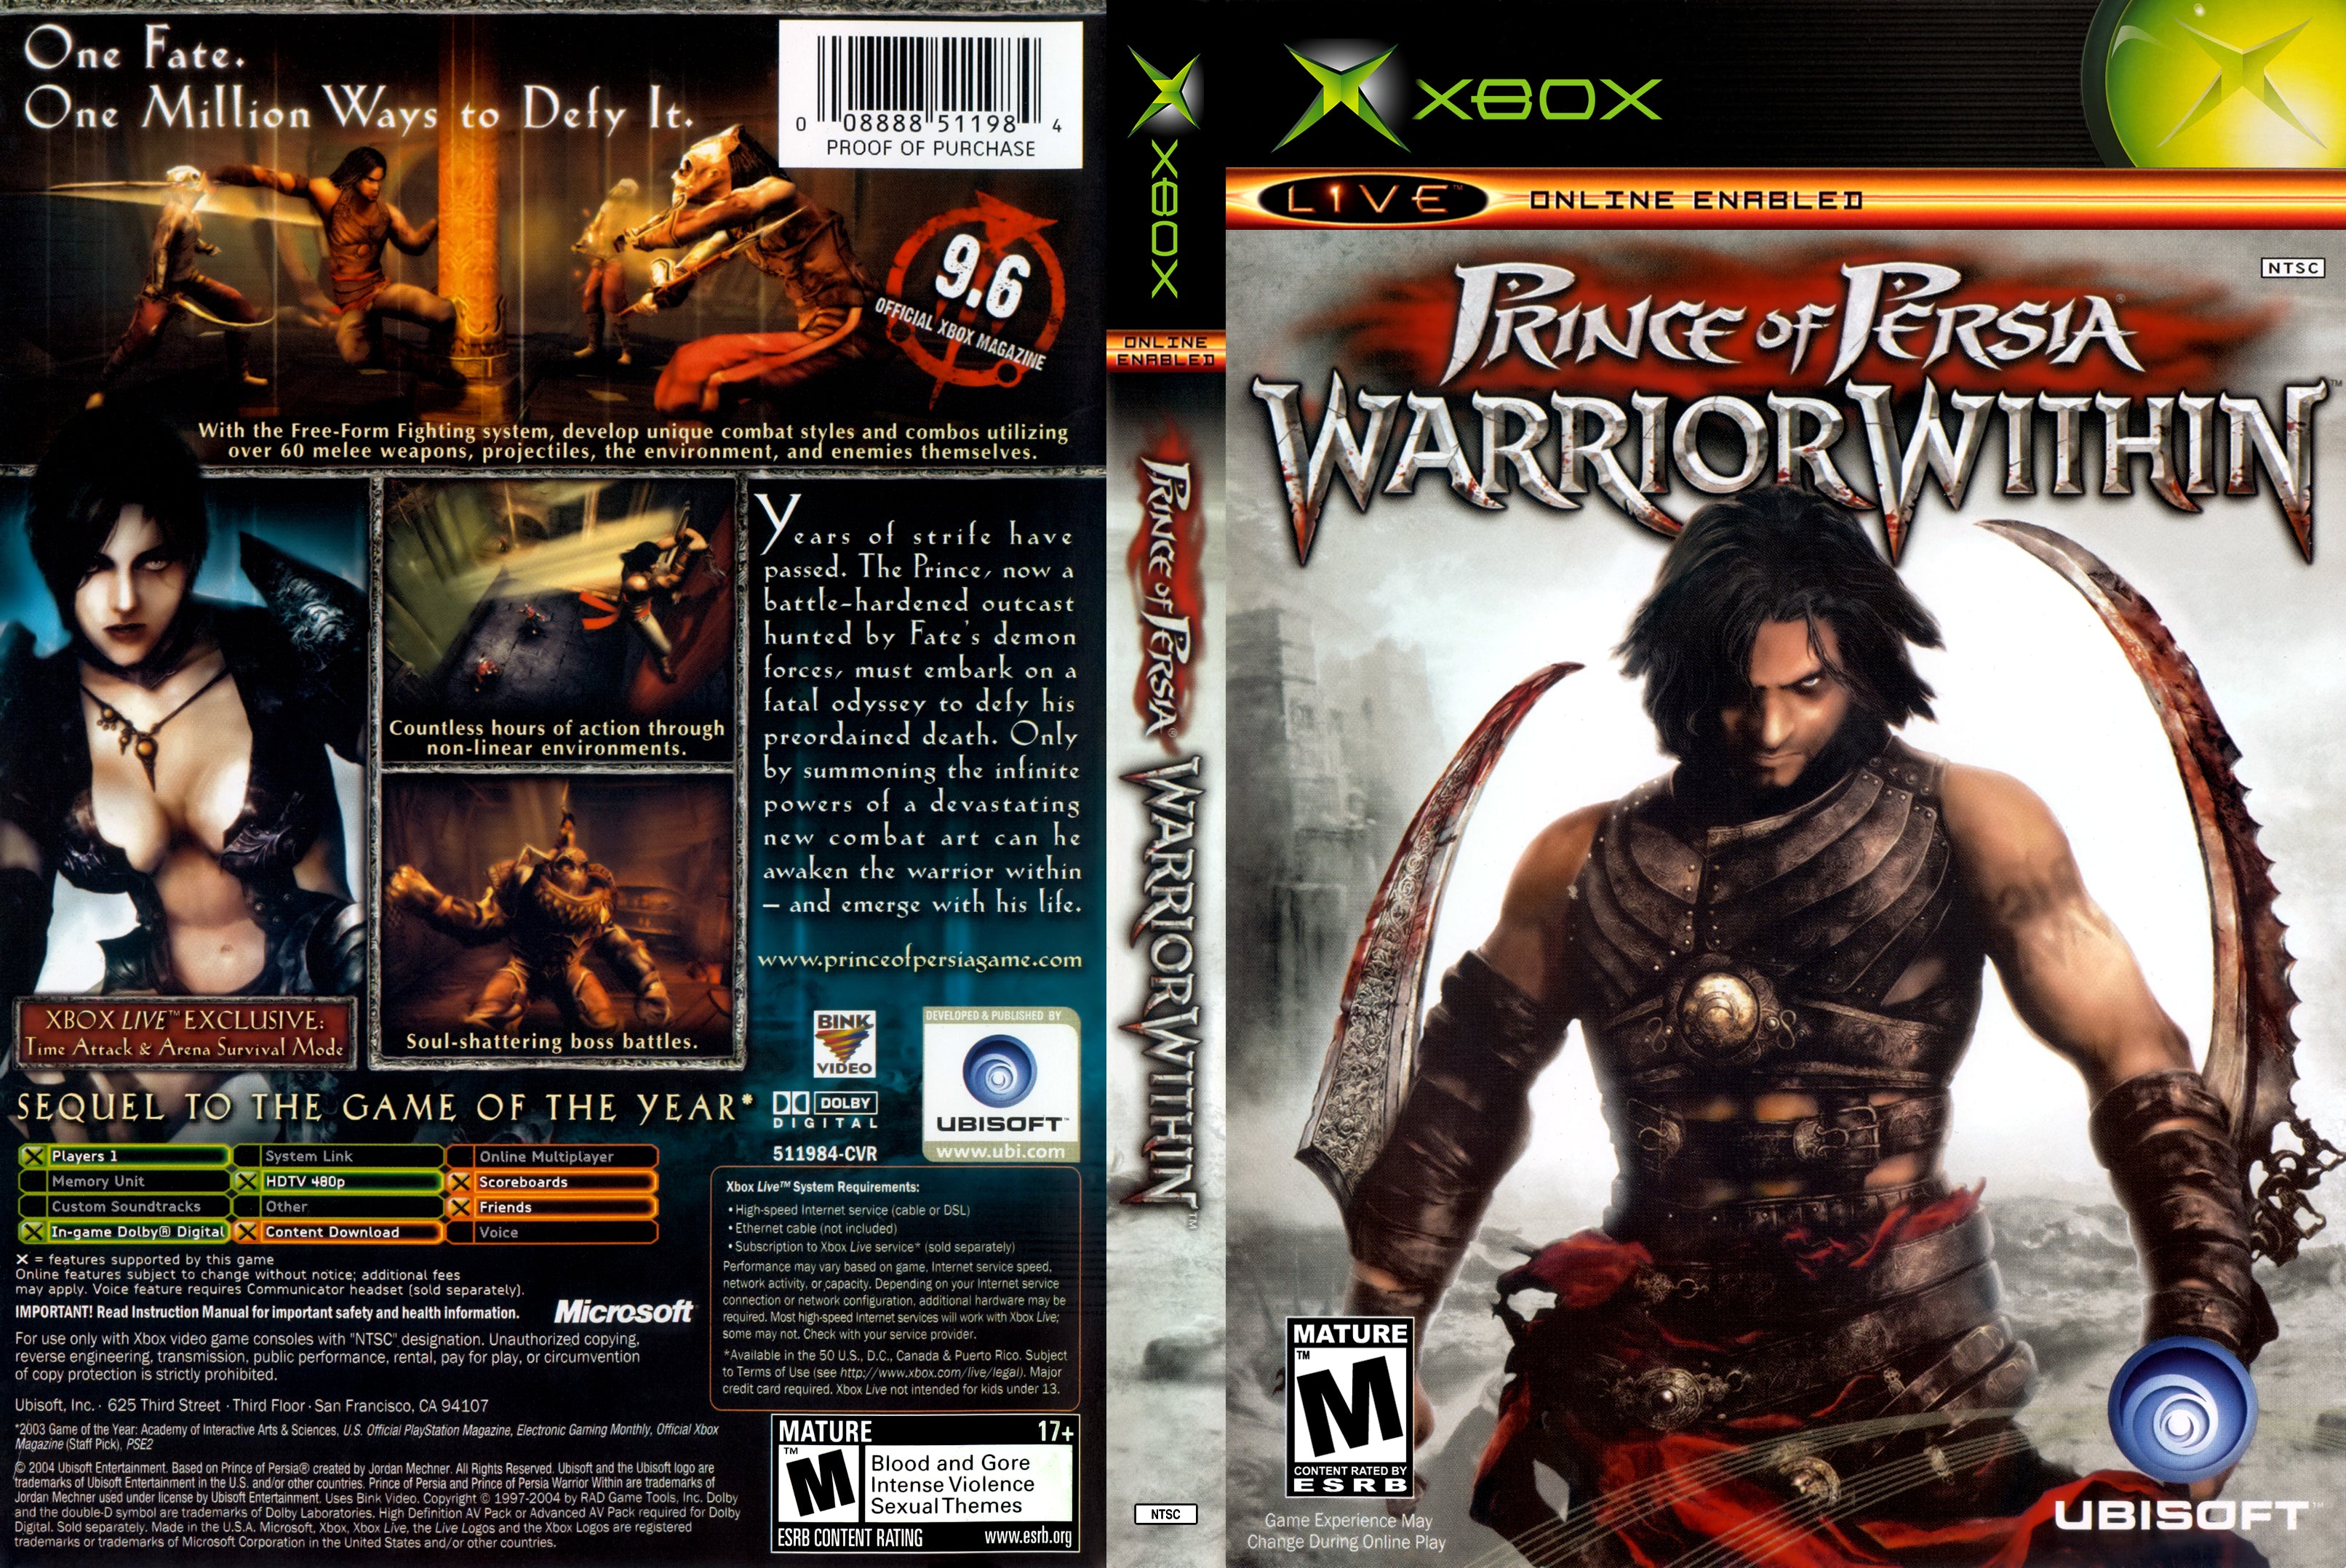 Xbox Prince of Persia: Warrior Within Games